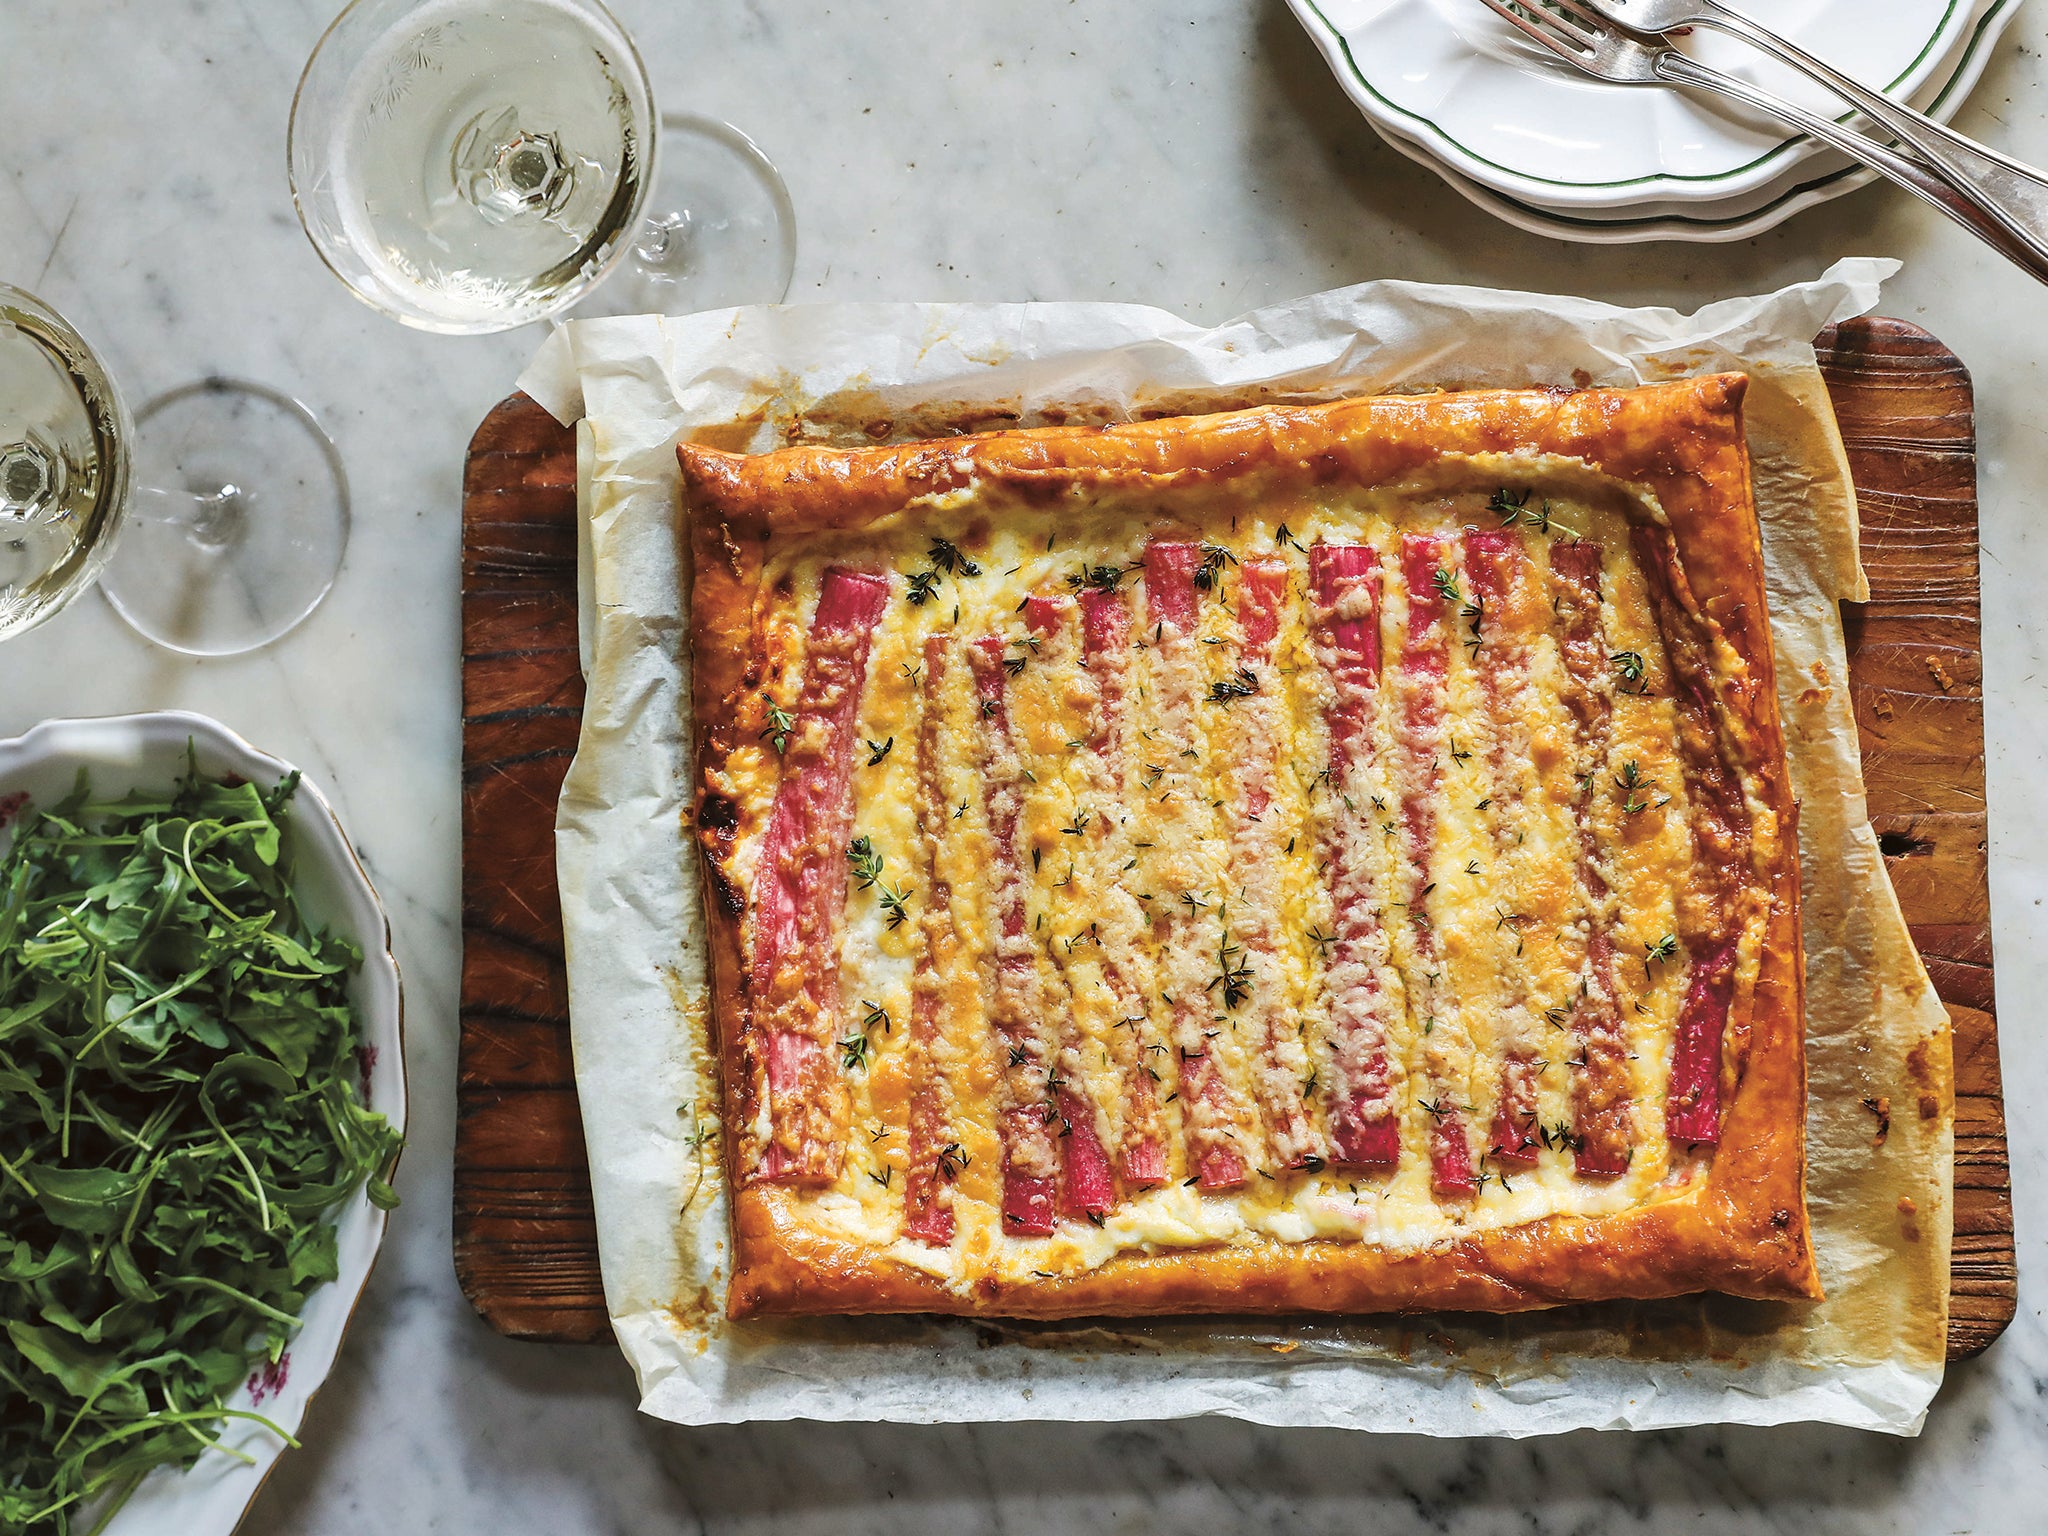 Tangy rhubarb meets melted Cheddar in this delicious savoury tart